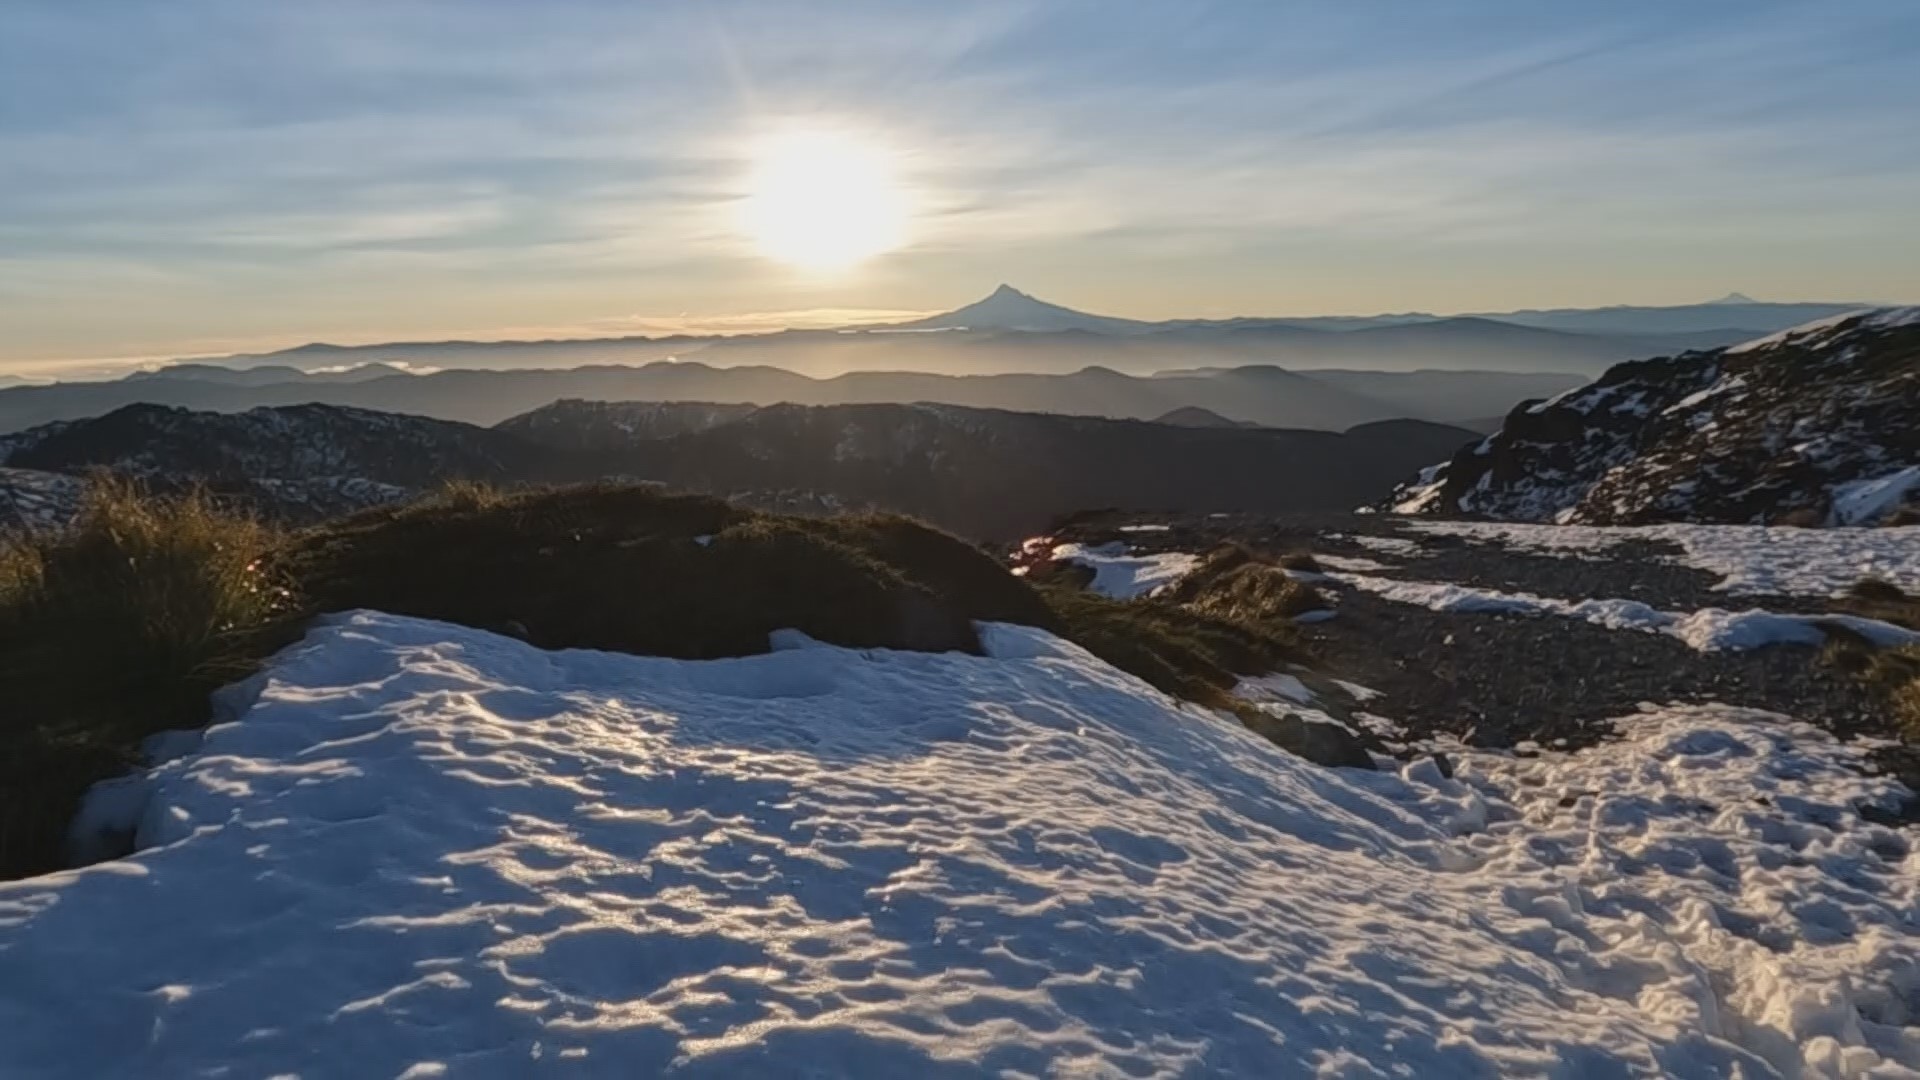 A new year comes new adventures. KGW photojournalist Jon Goodwin went on his first trek of 2023 and the trail offered views of Mount Hood and Mount Rainier.